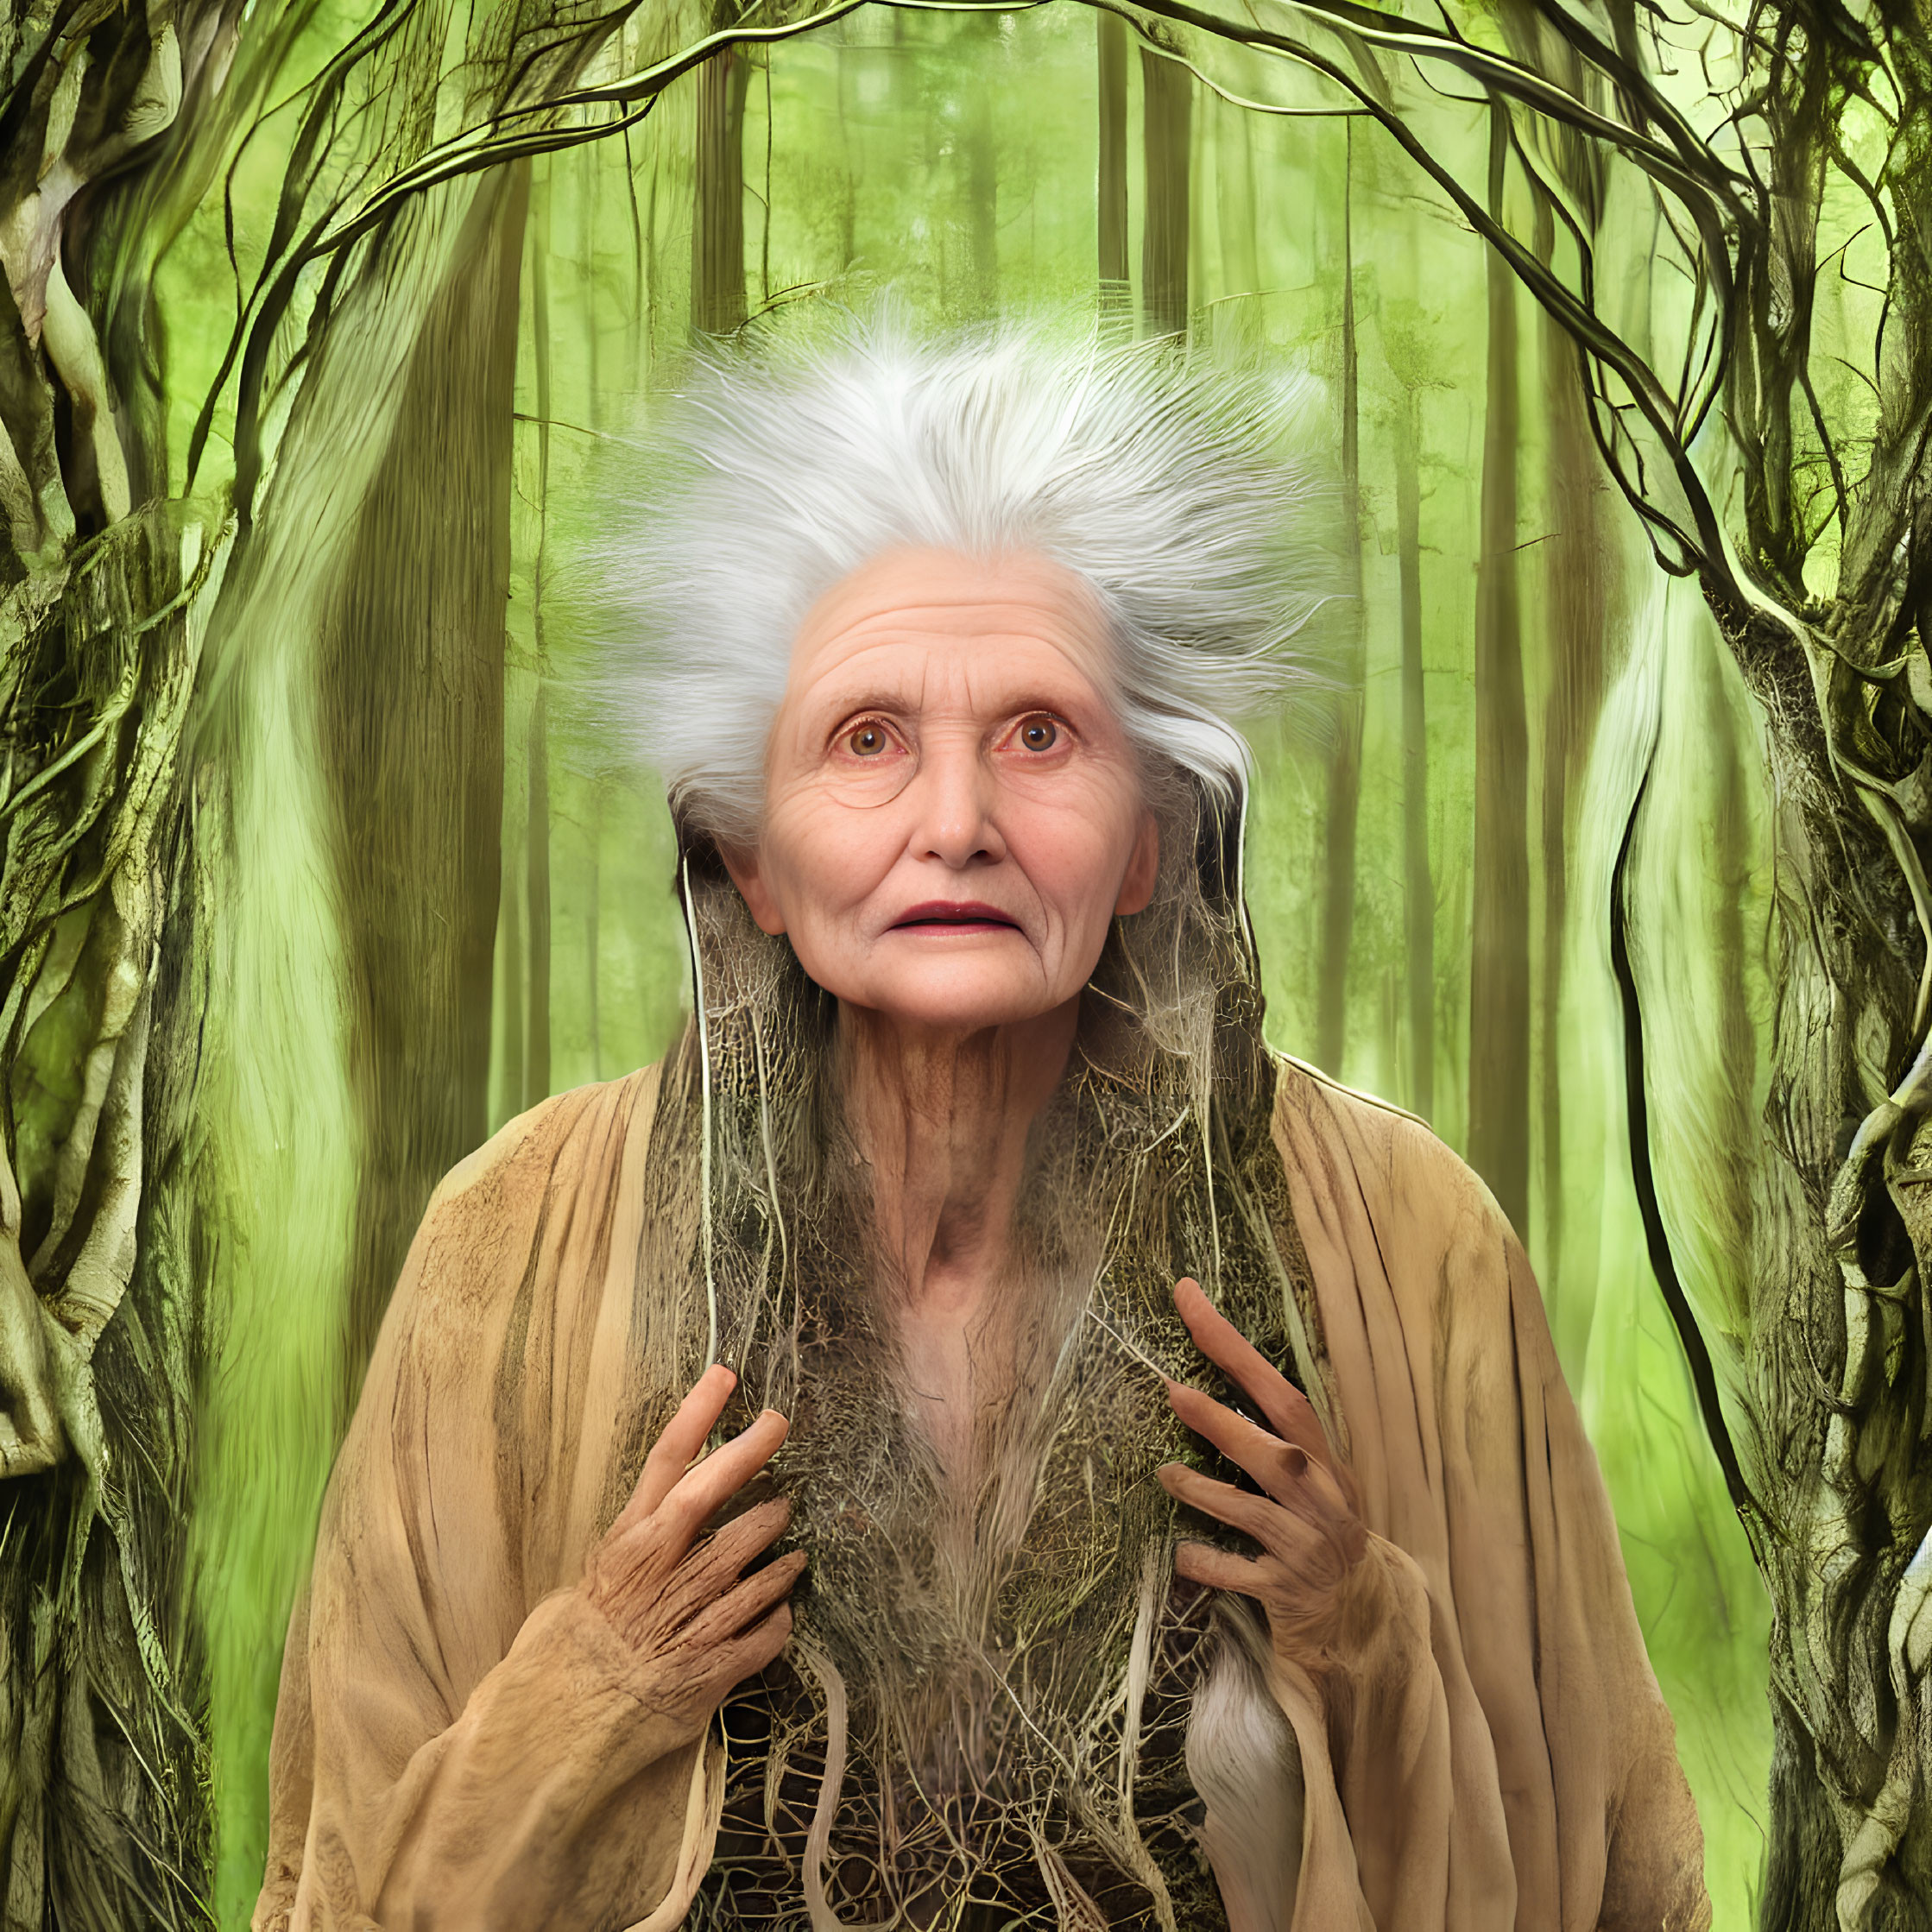 Elderly woman with white hair in mystical green forest